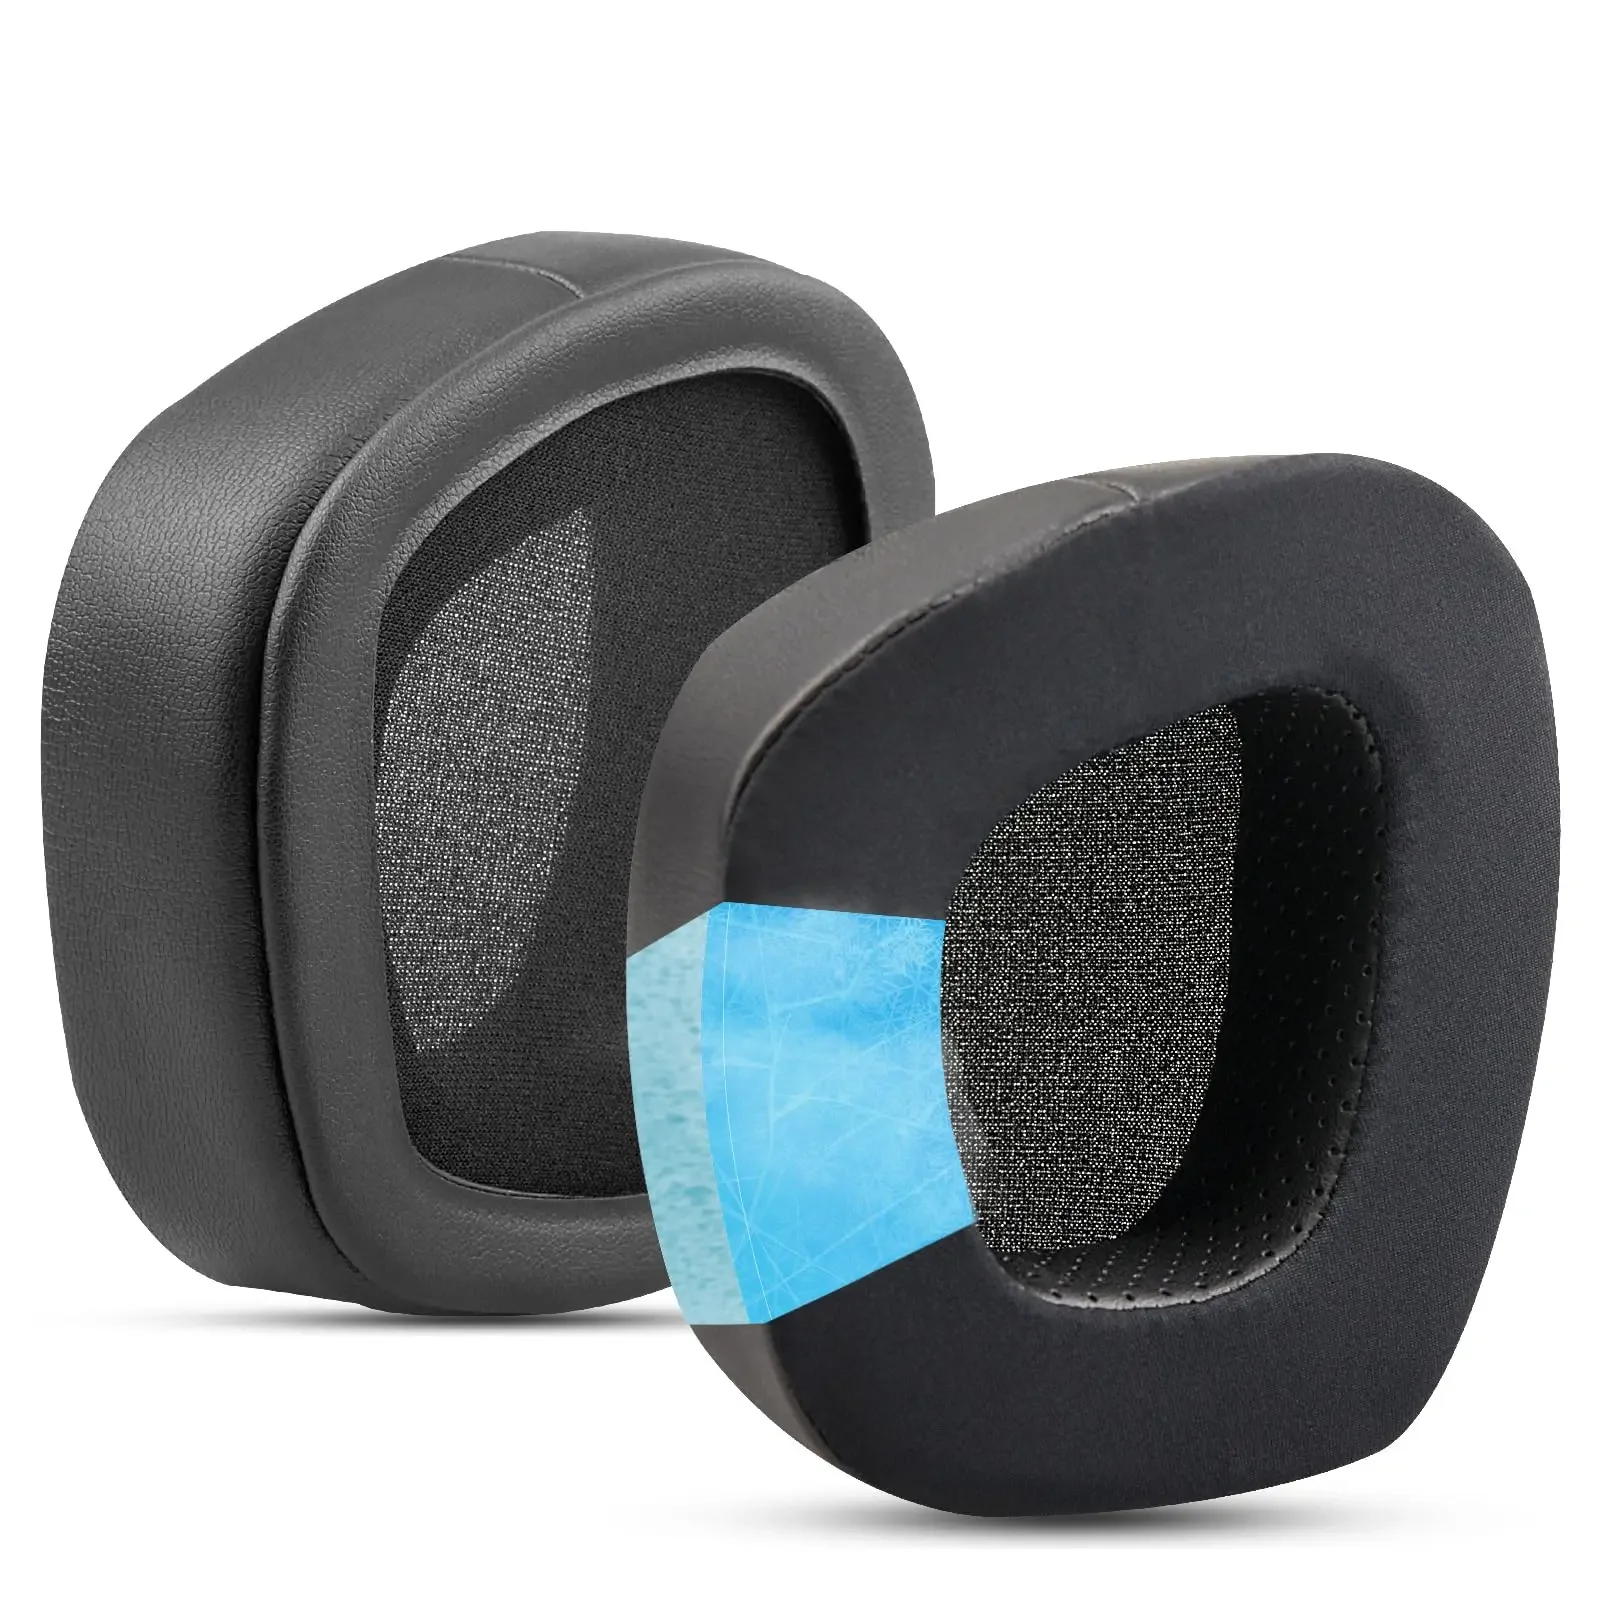 

Cooling Gel Earpads Replacement for Corsair Void/Void Pro/Void Elite/Surround Wired & Wireless RGB USB Gaming Headsets